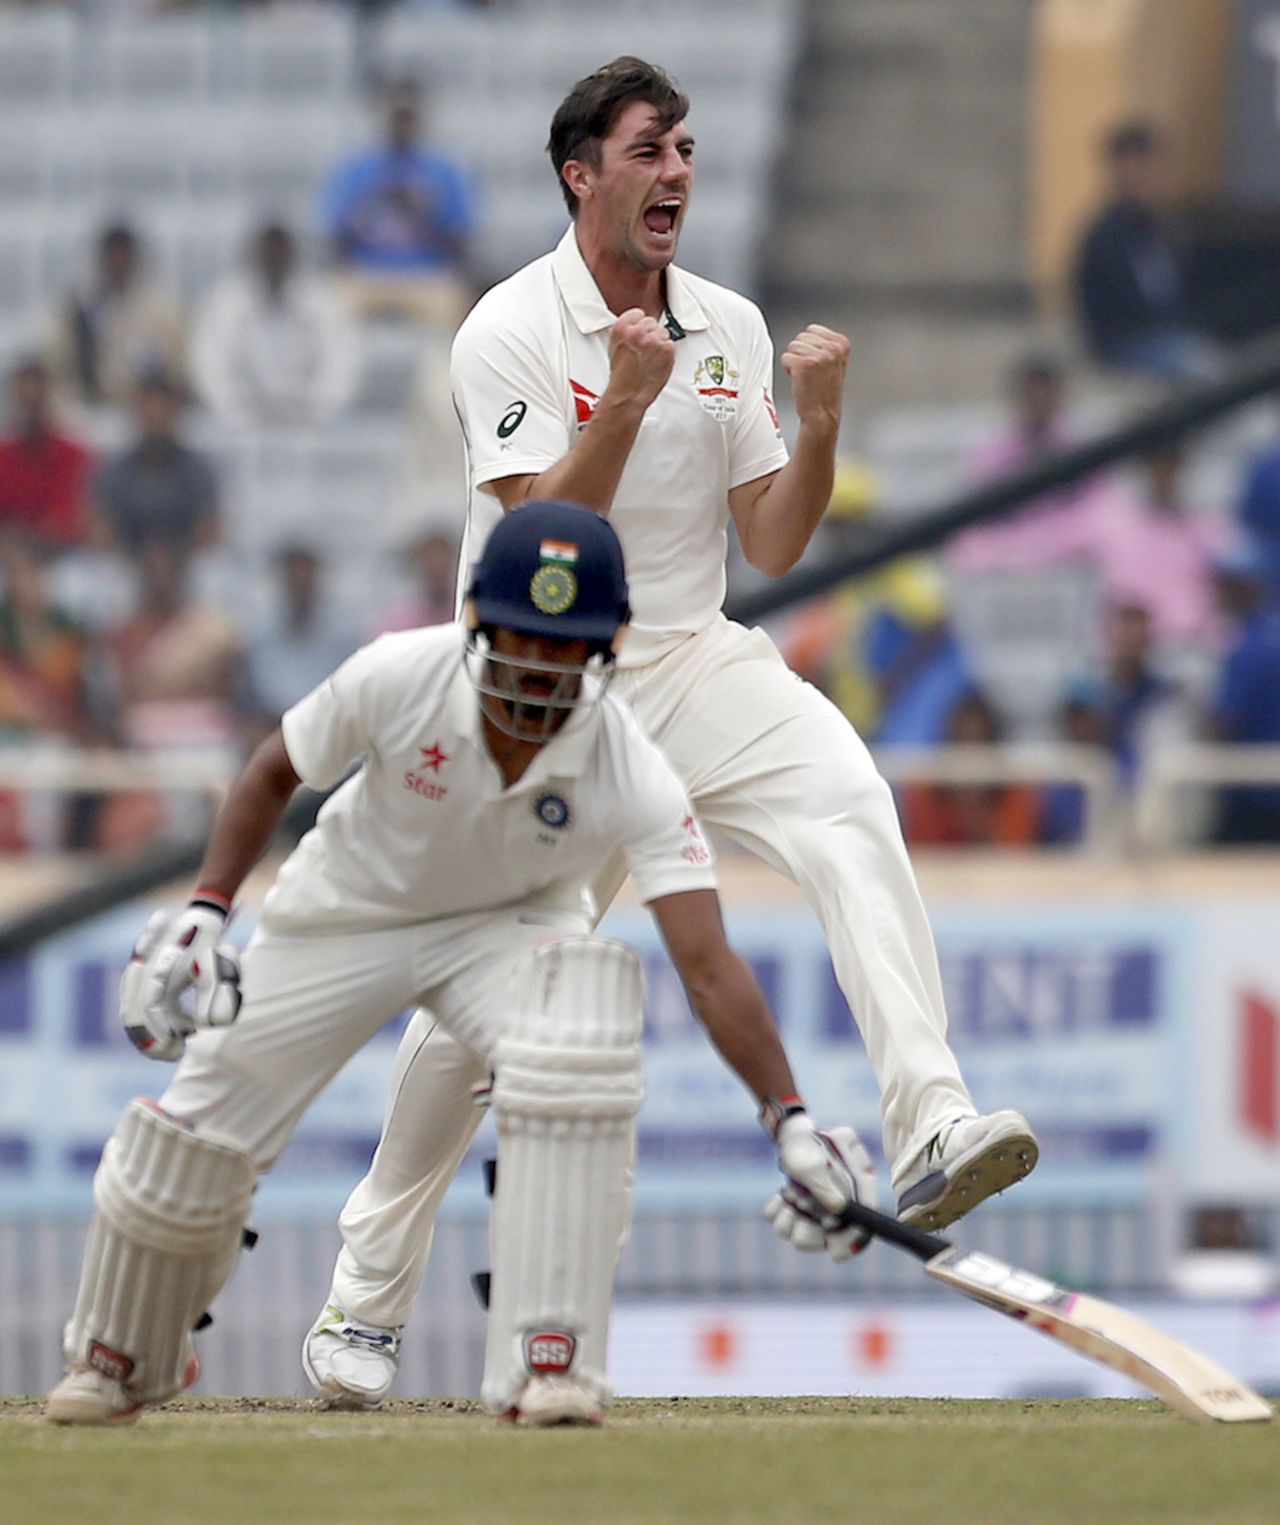 Pat Cummins had Wriddhiman Saha lbw before the decision was overturned, India v Australia, 3rd Test, Ranchi, 4th day, March 19, 2017